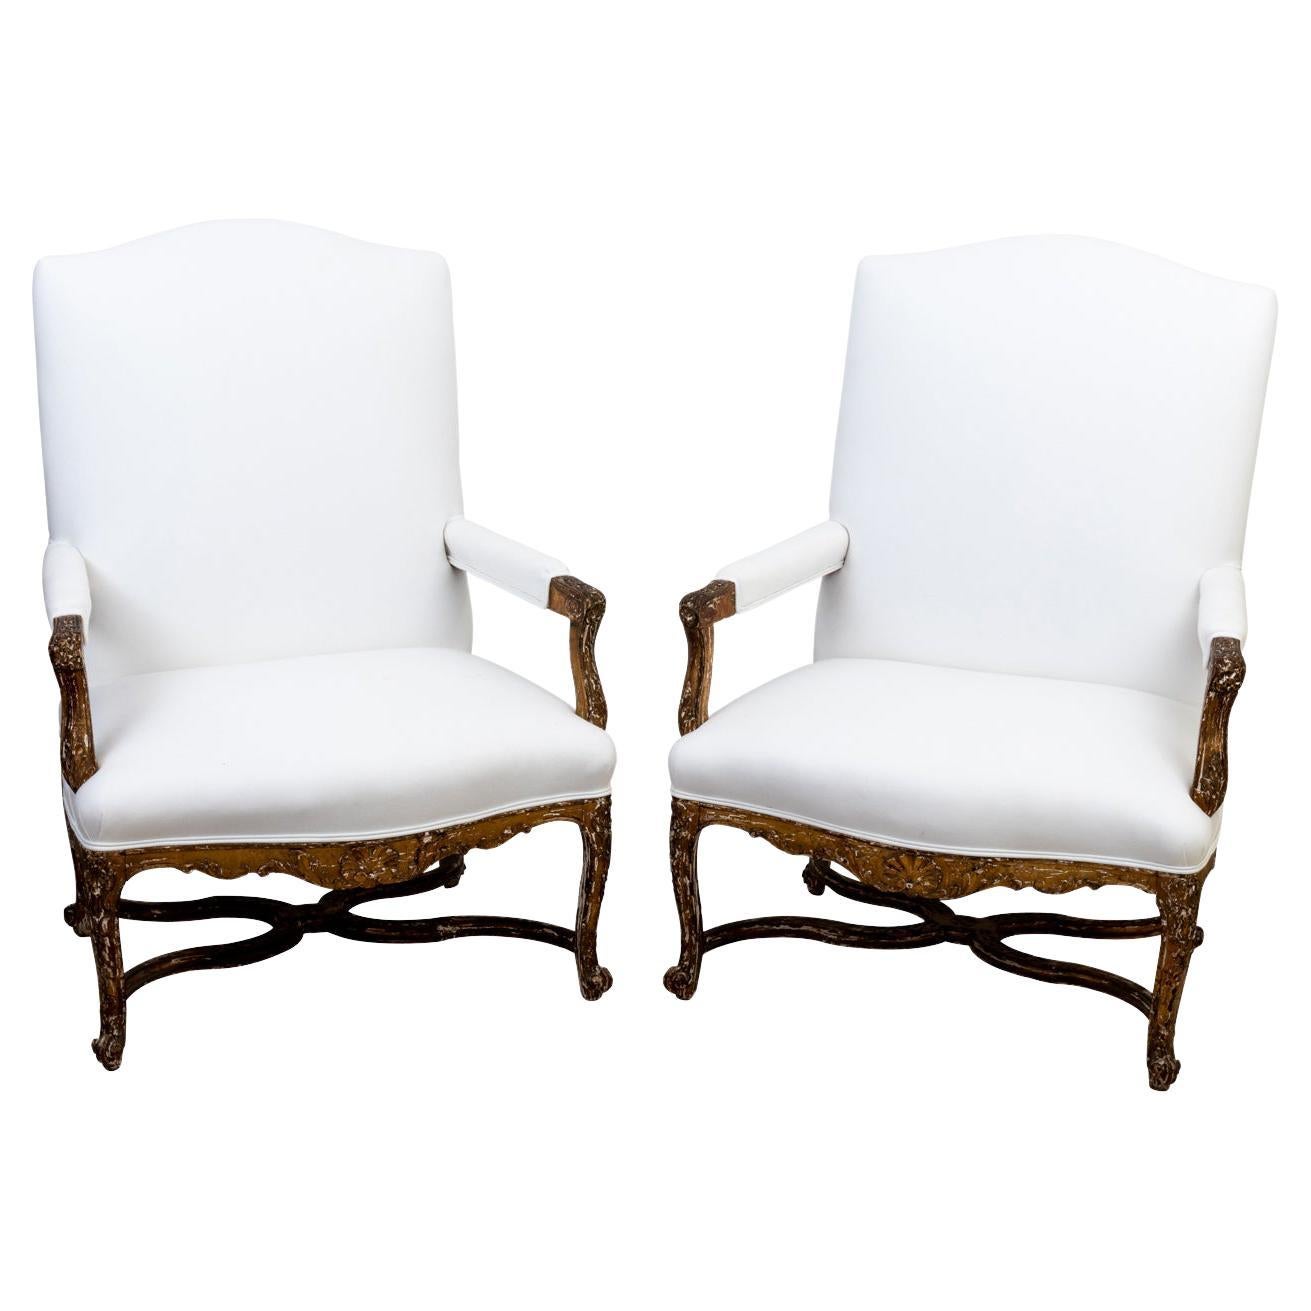 Pair of French Gold Gilt Carved Chairs